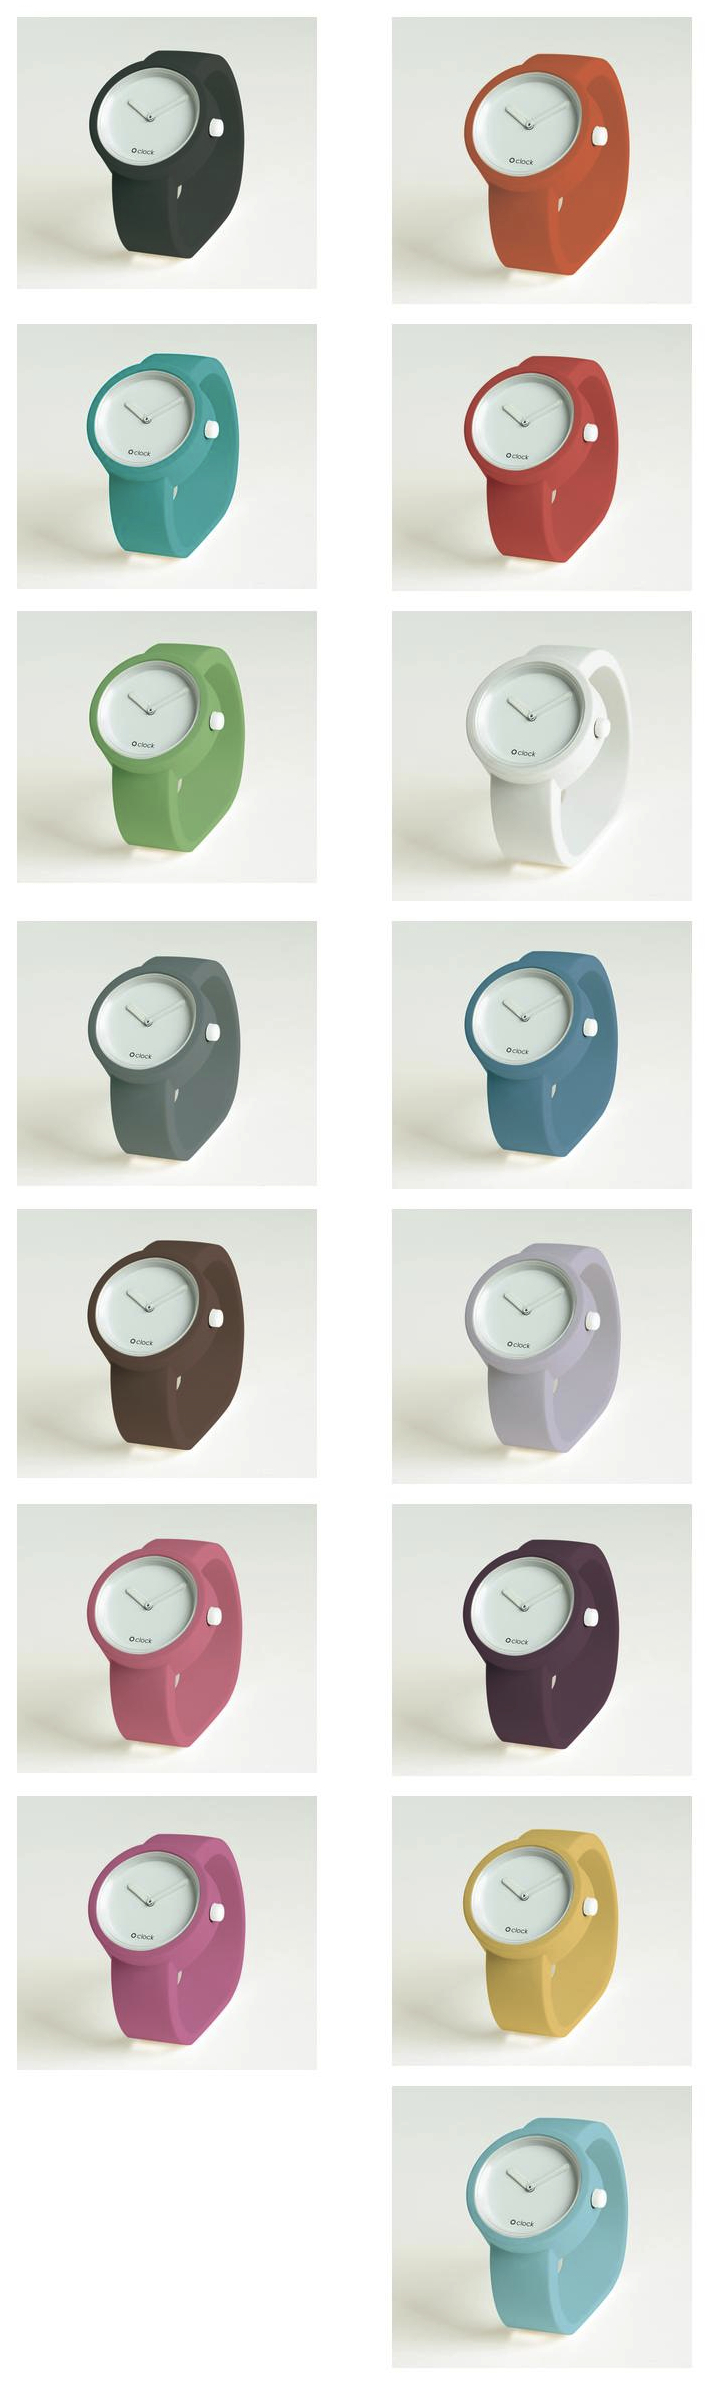 O'CLOCK WATCHES